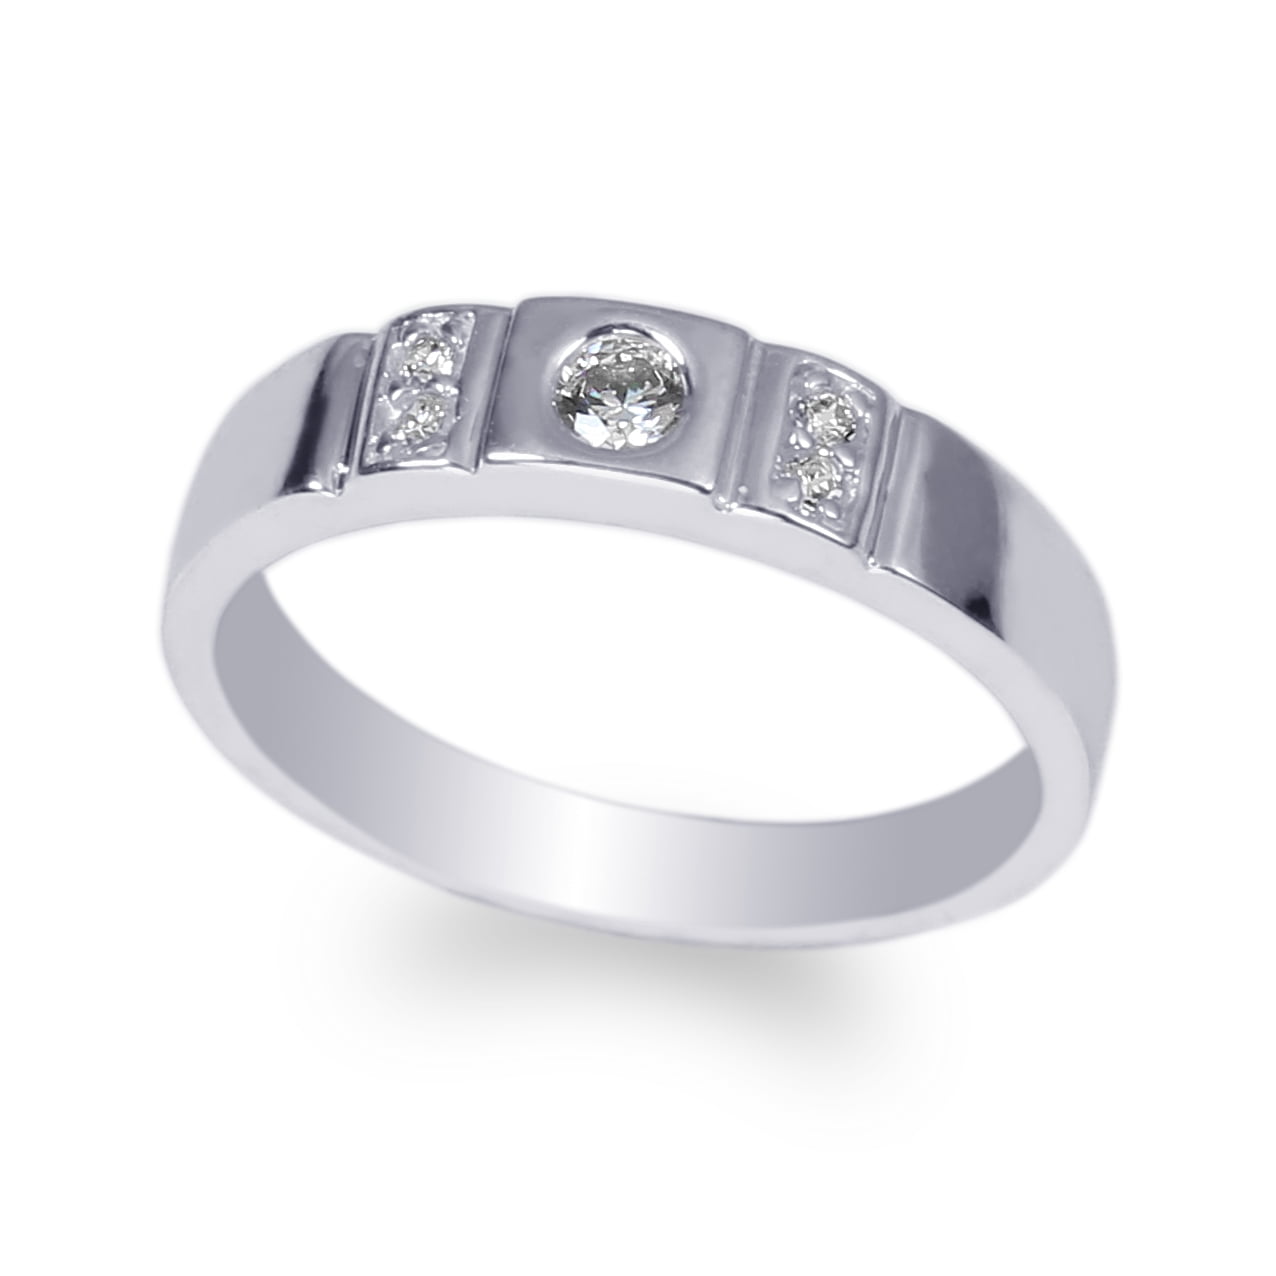 1.25ct Round CZ shared prong Wedding Band .925 Sterling Silver Ring Sizes 4-10 